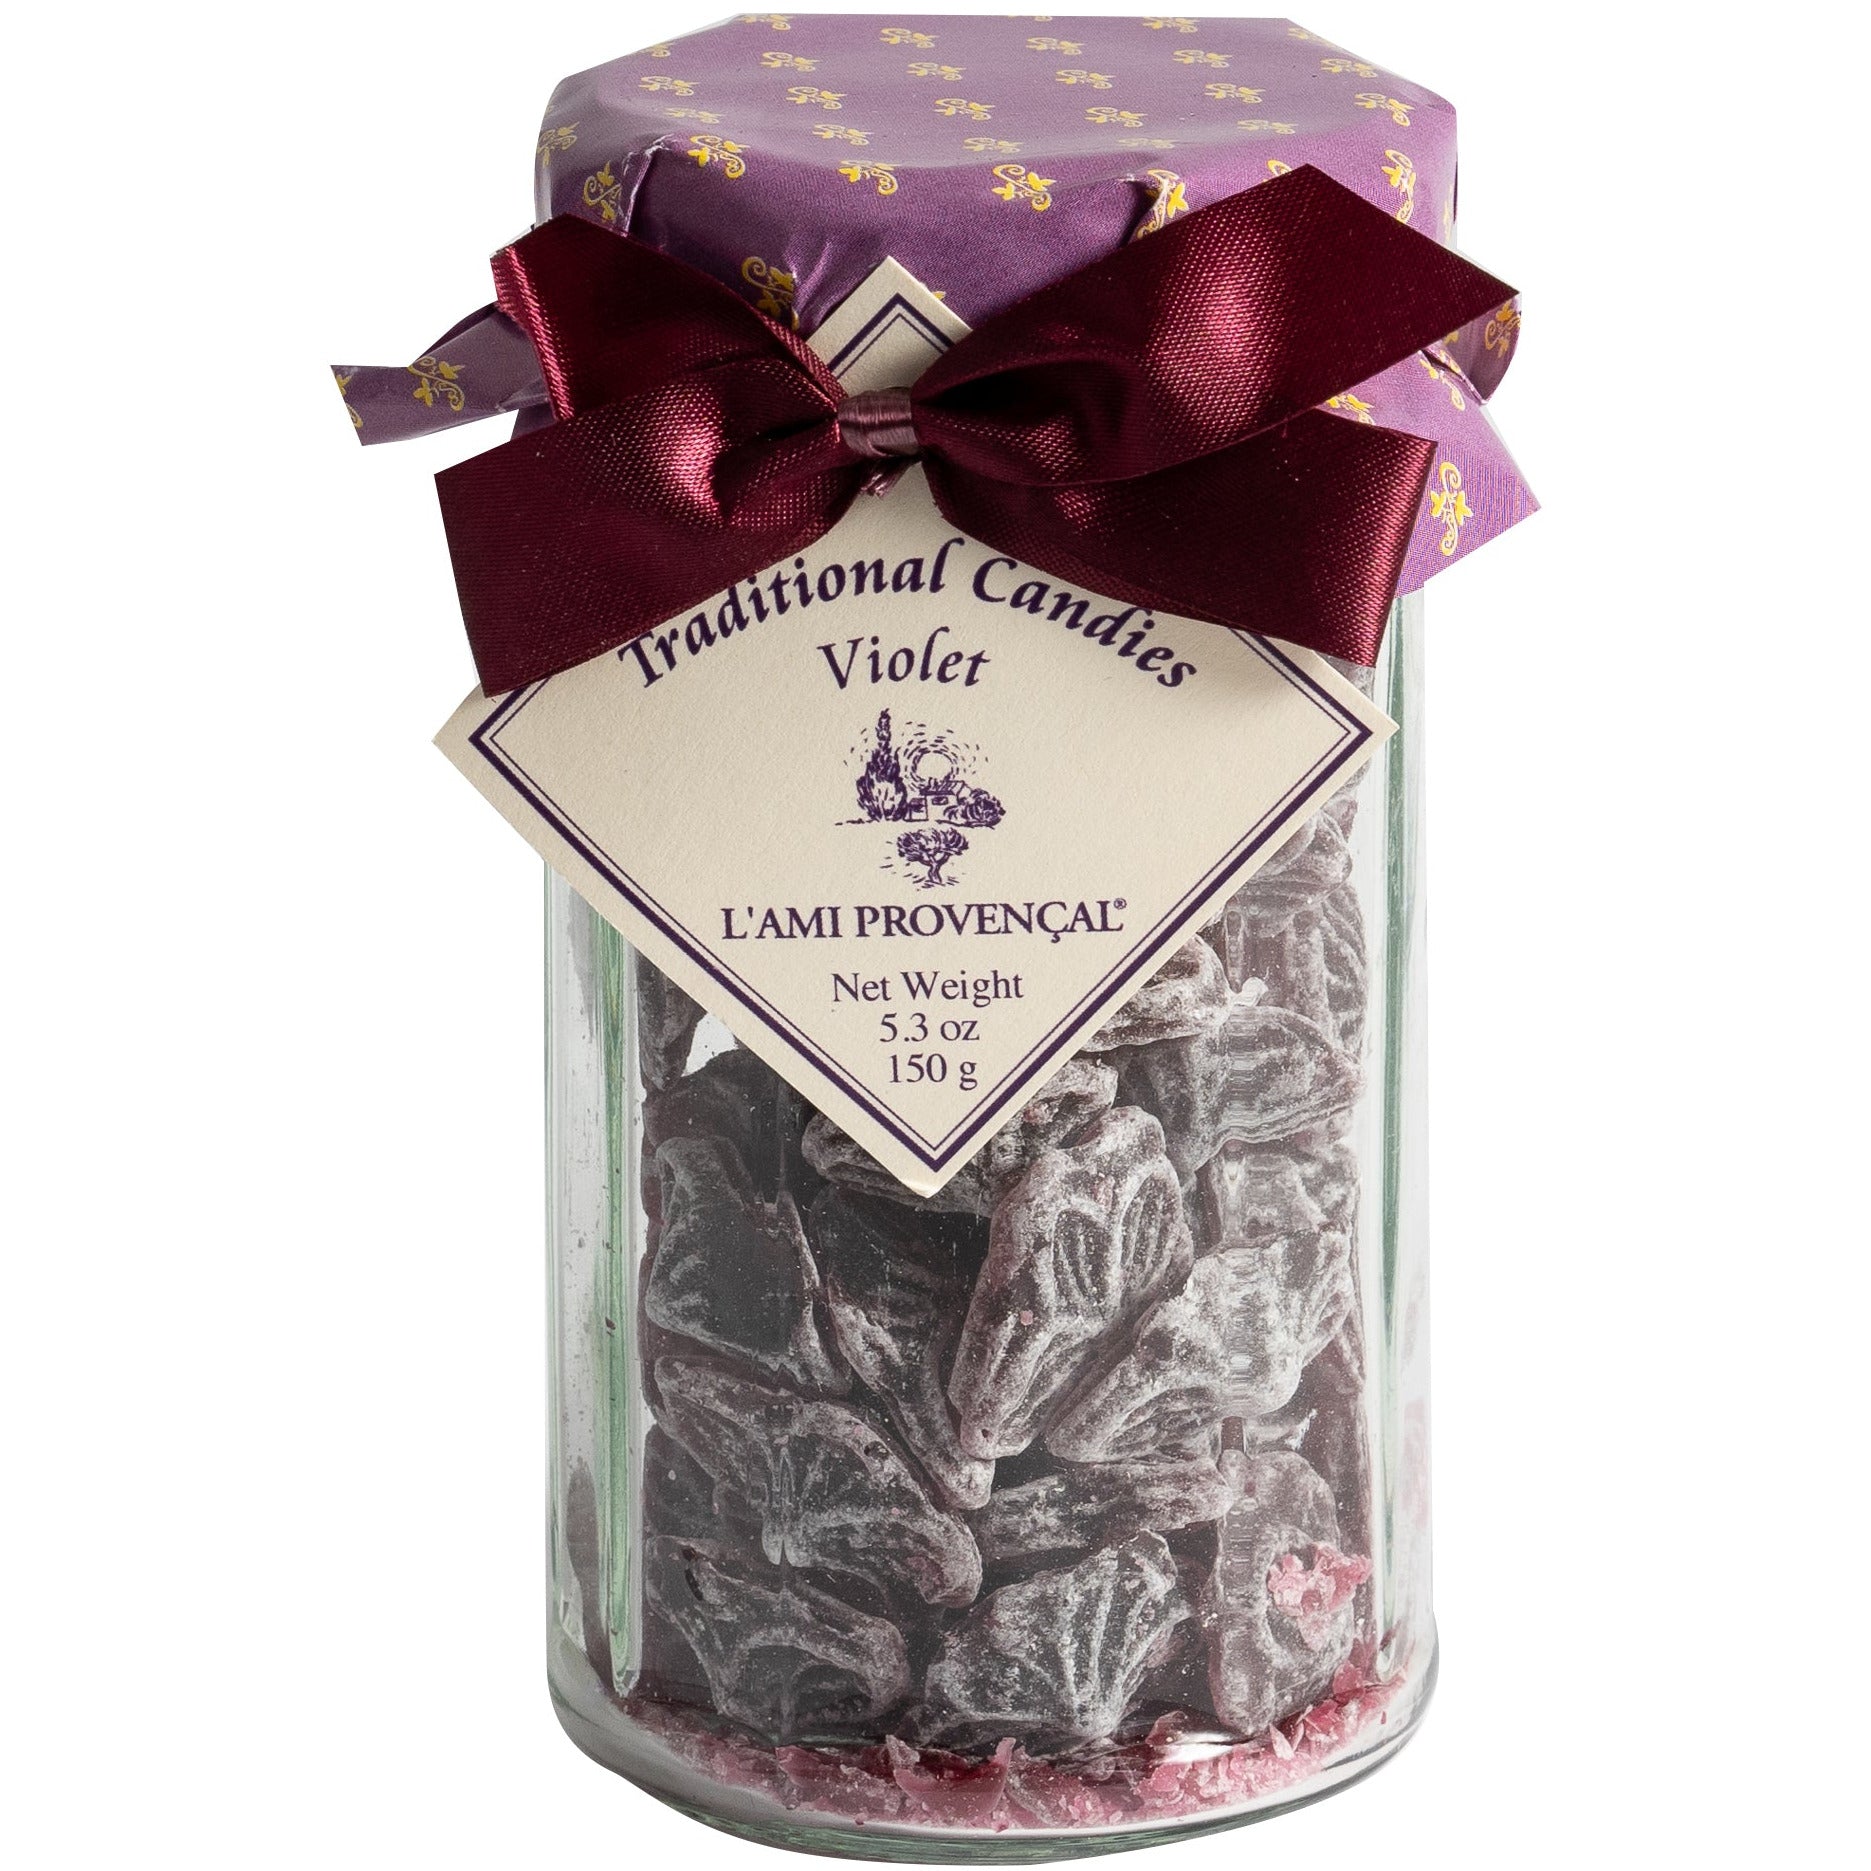 French Traditional Violet (violette) Candies